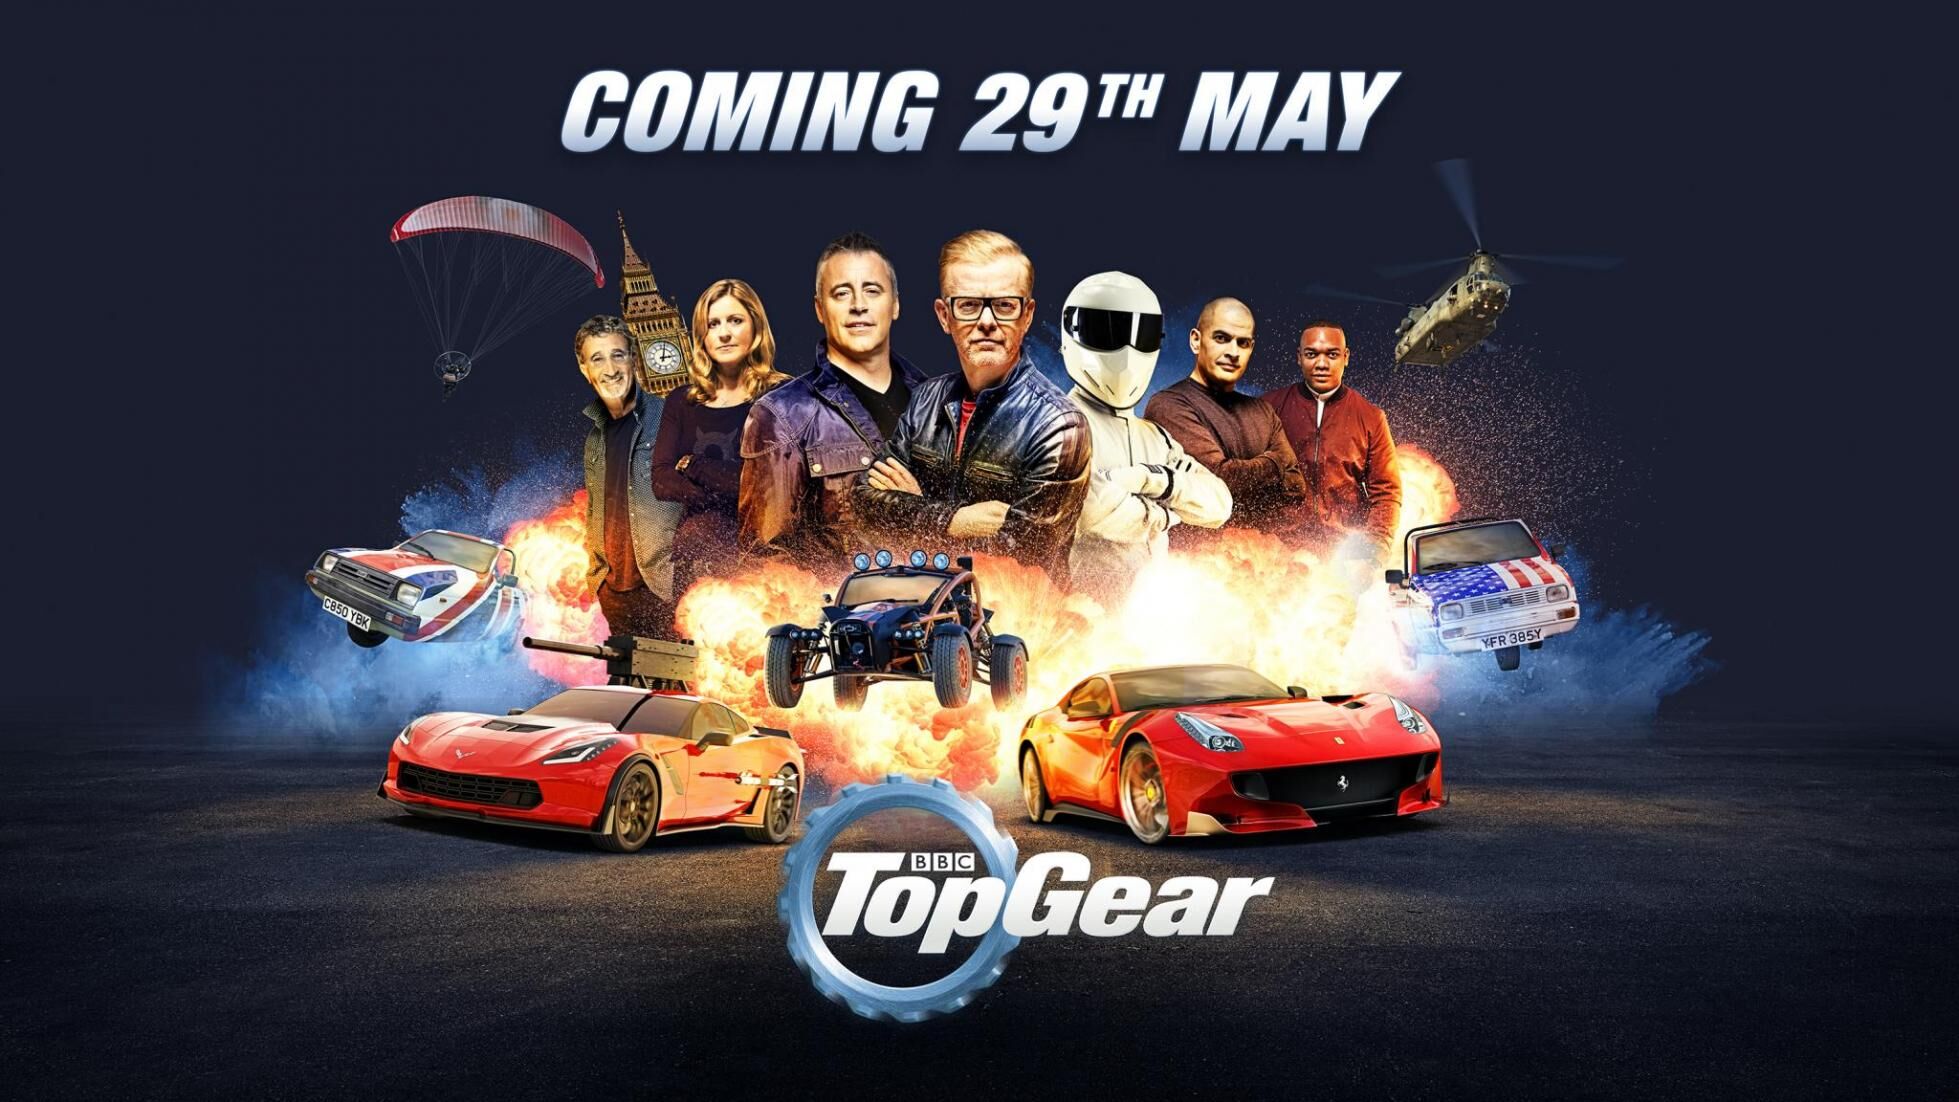 FlySpain Instructor helps kick off New Top Gear show this weekend